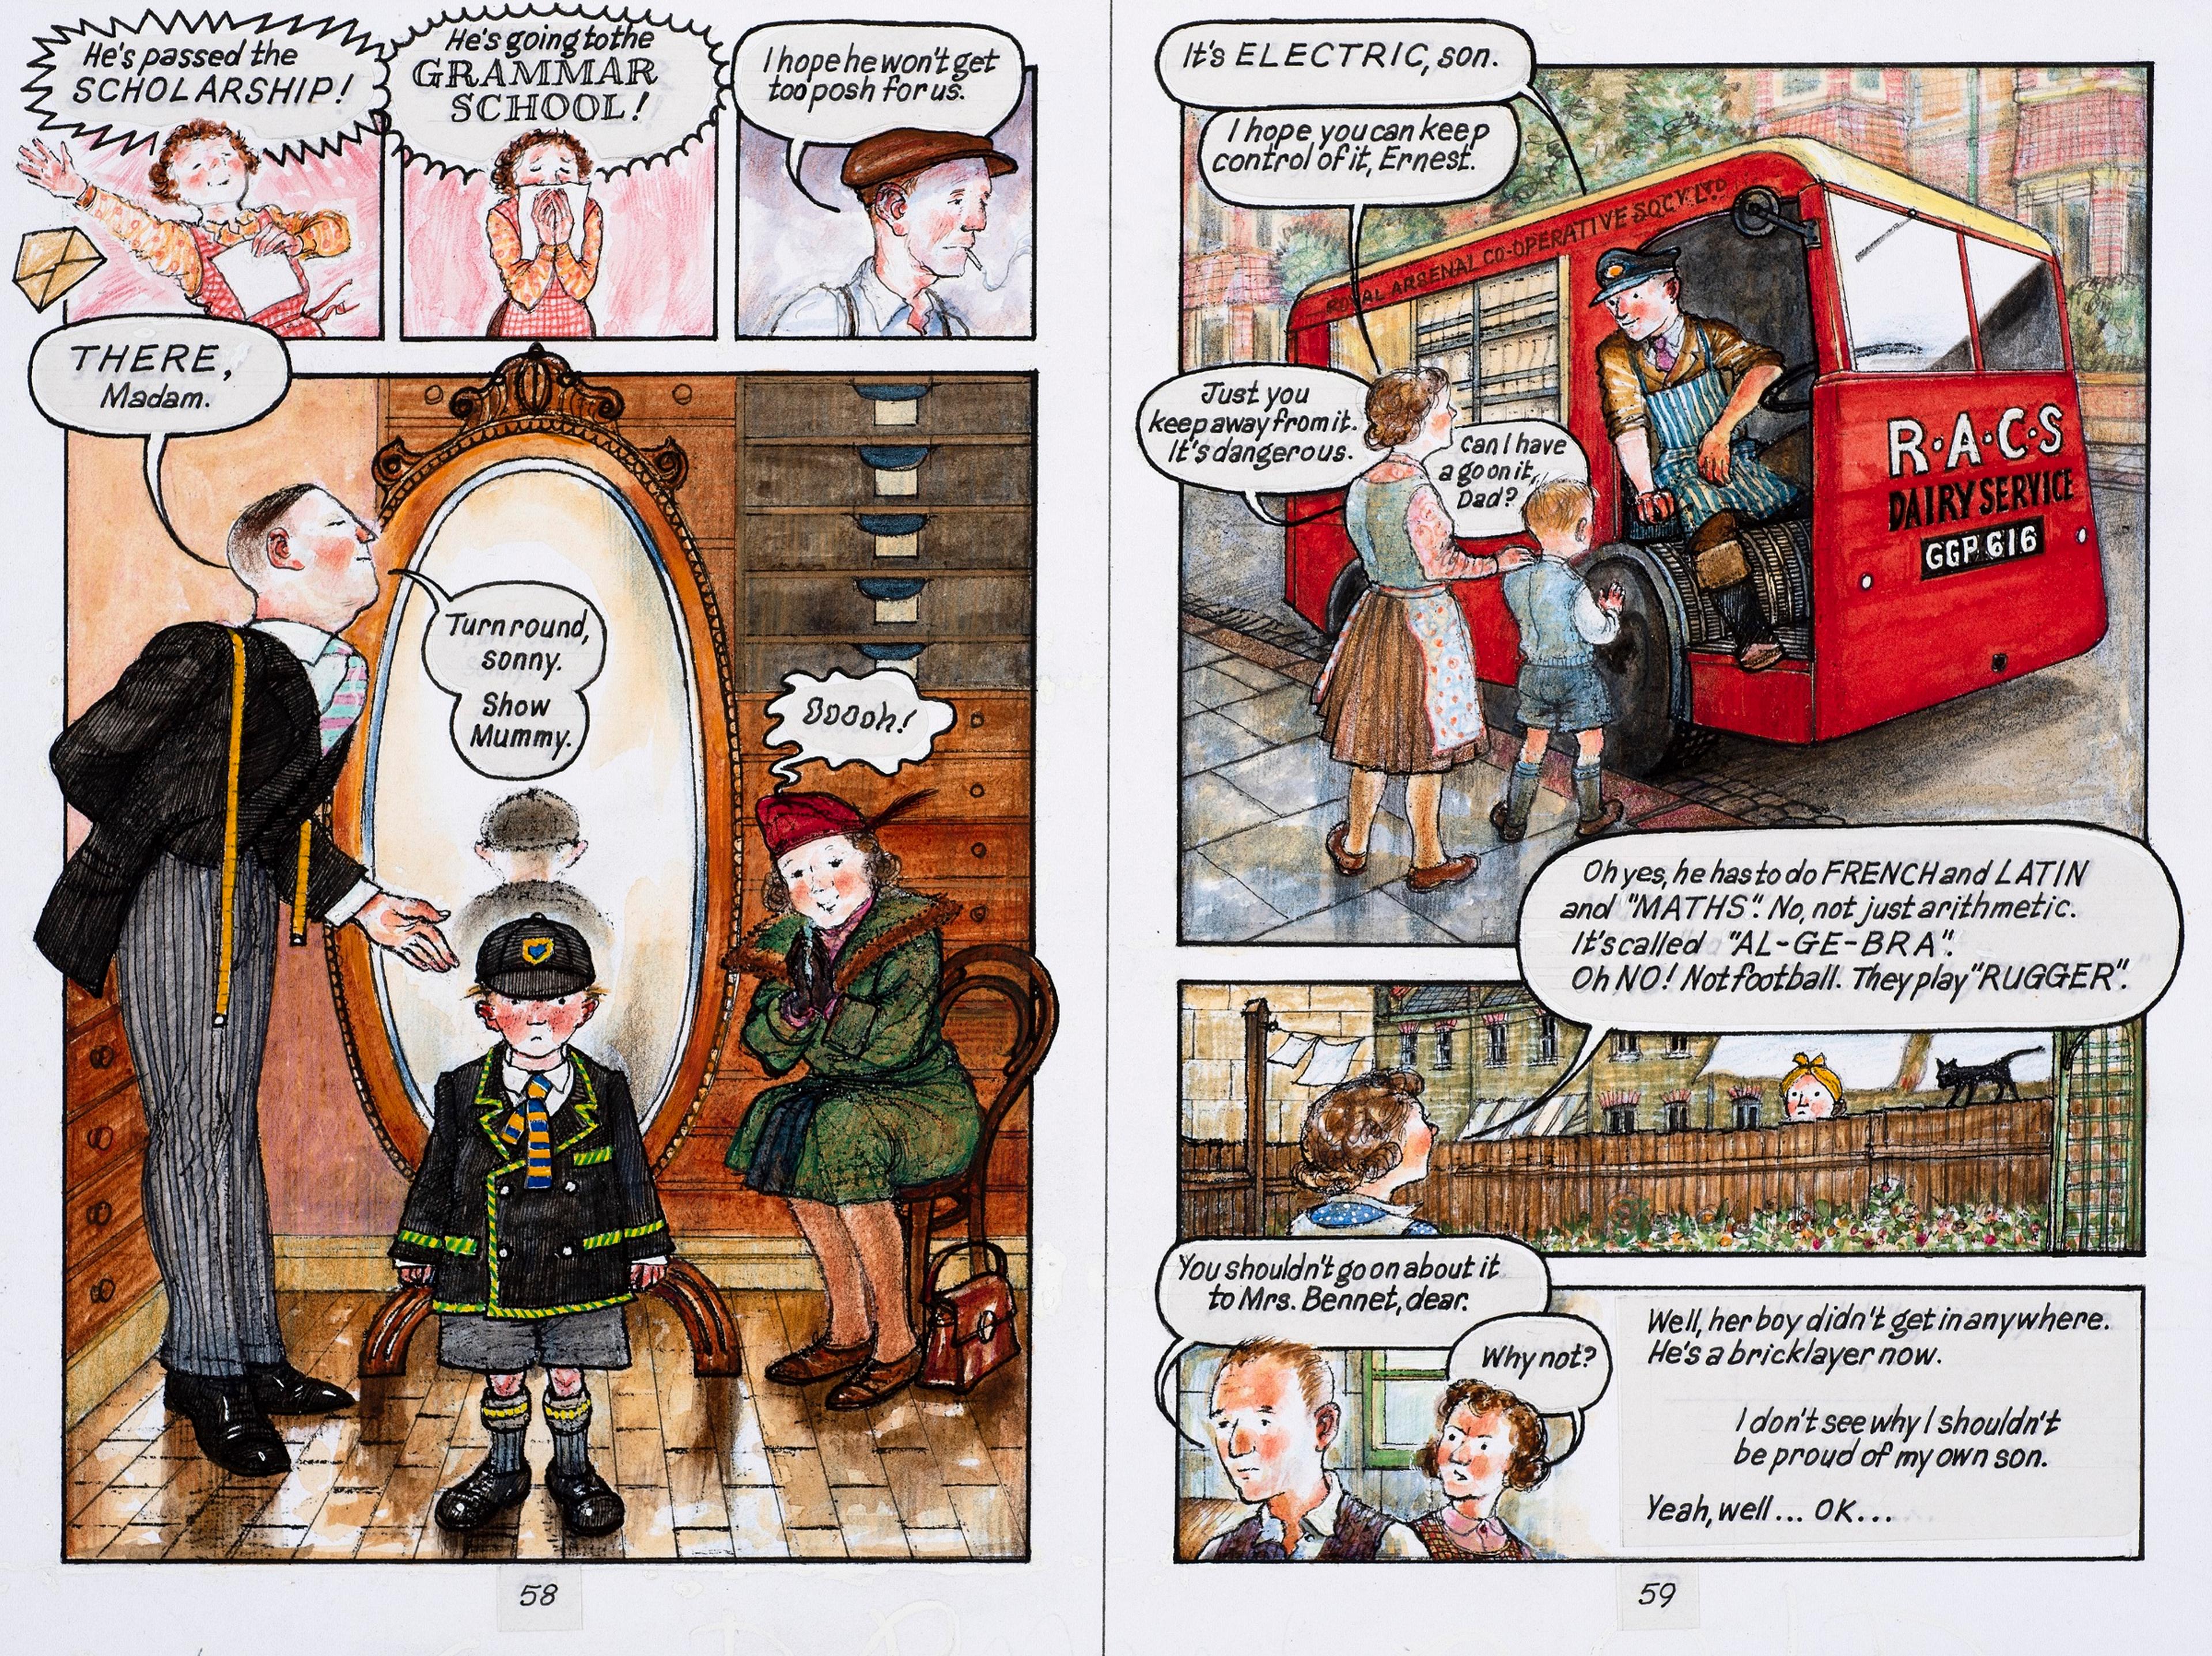 Drawing with 7 panels showing a boy and his parents preparing for grammar school